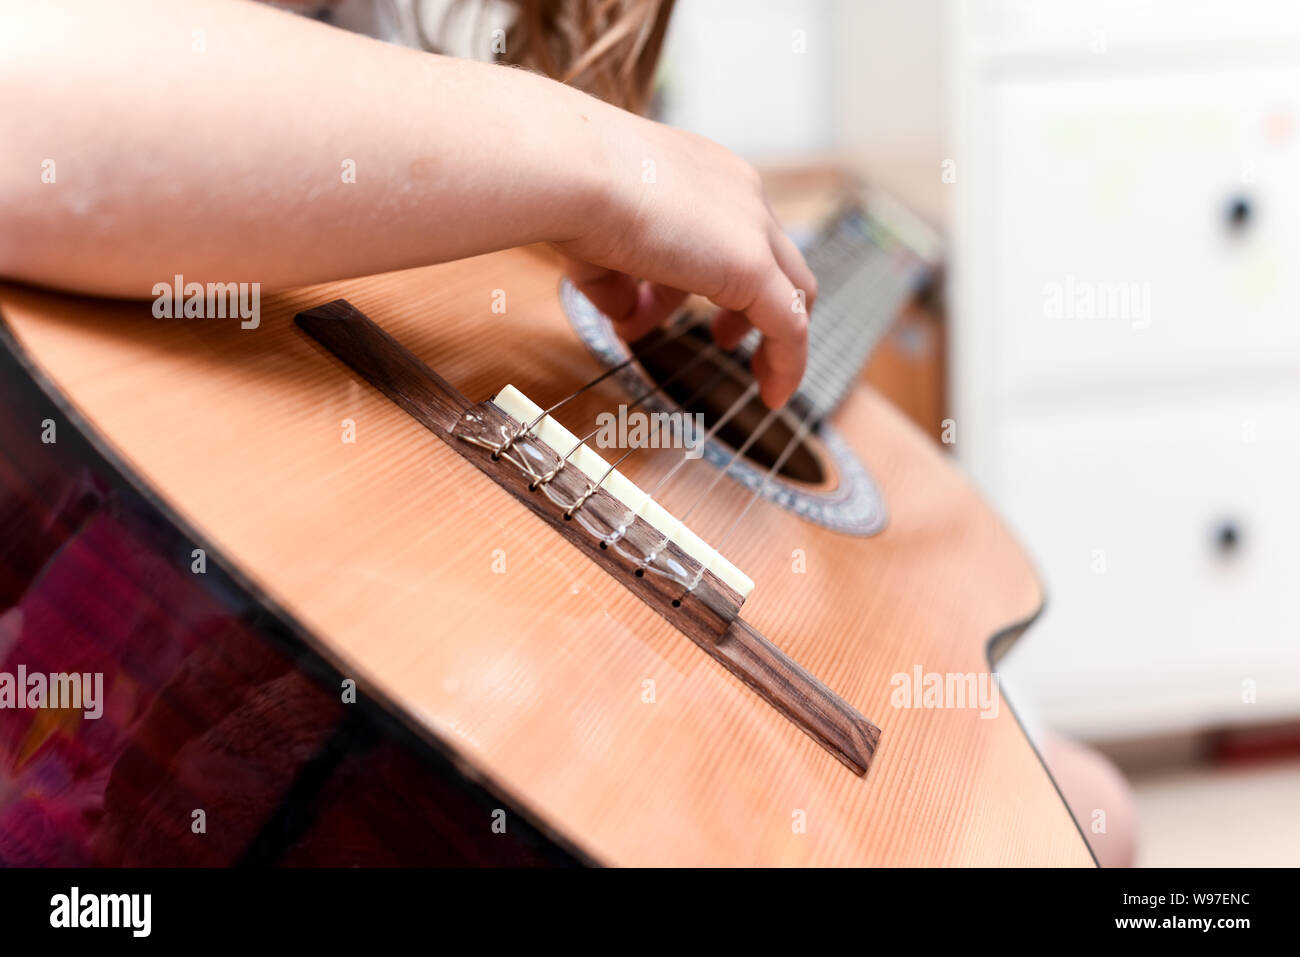 Girl learns to play guitar during a music lesson on the instrument Stock Photo